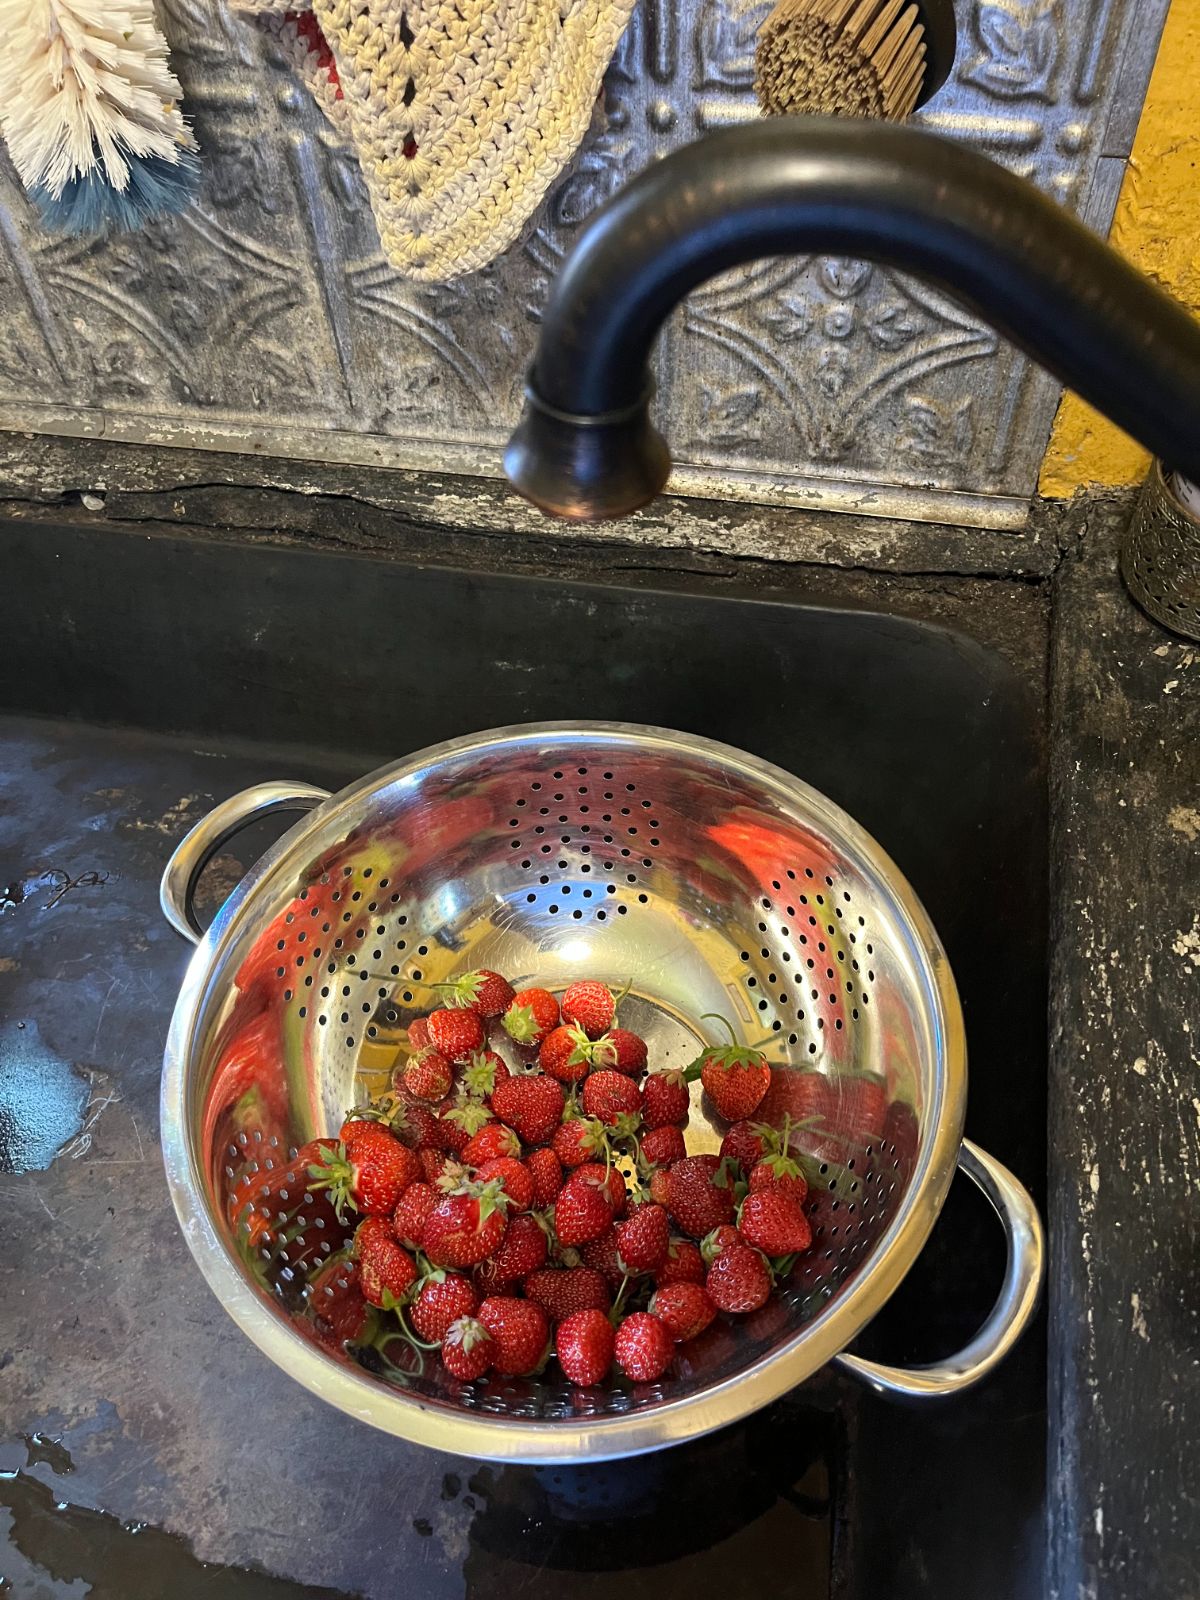 A colander of strawberries in a sink being washed